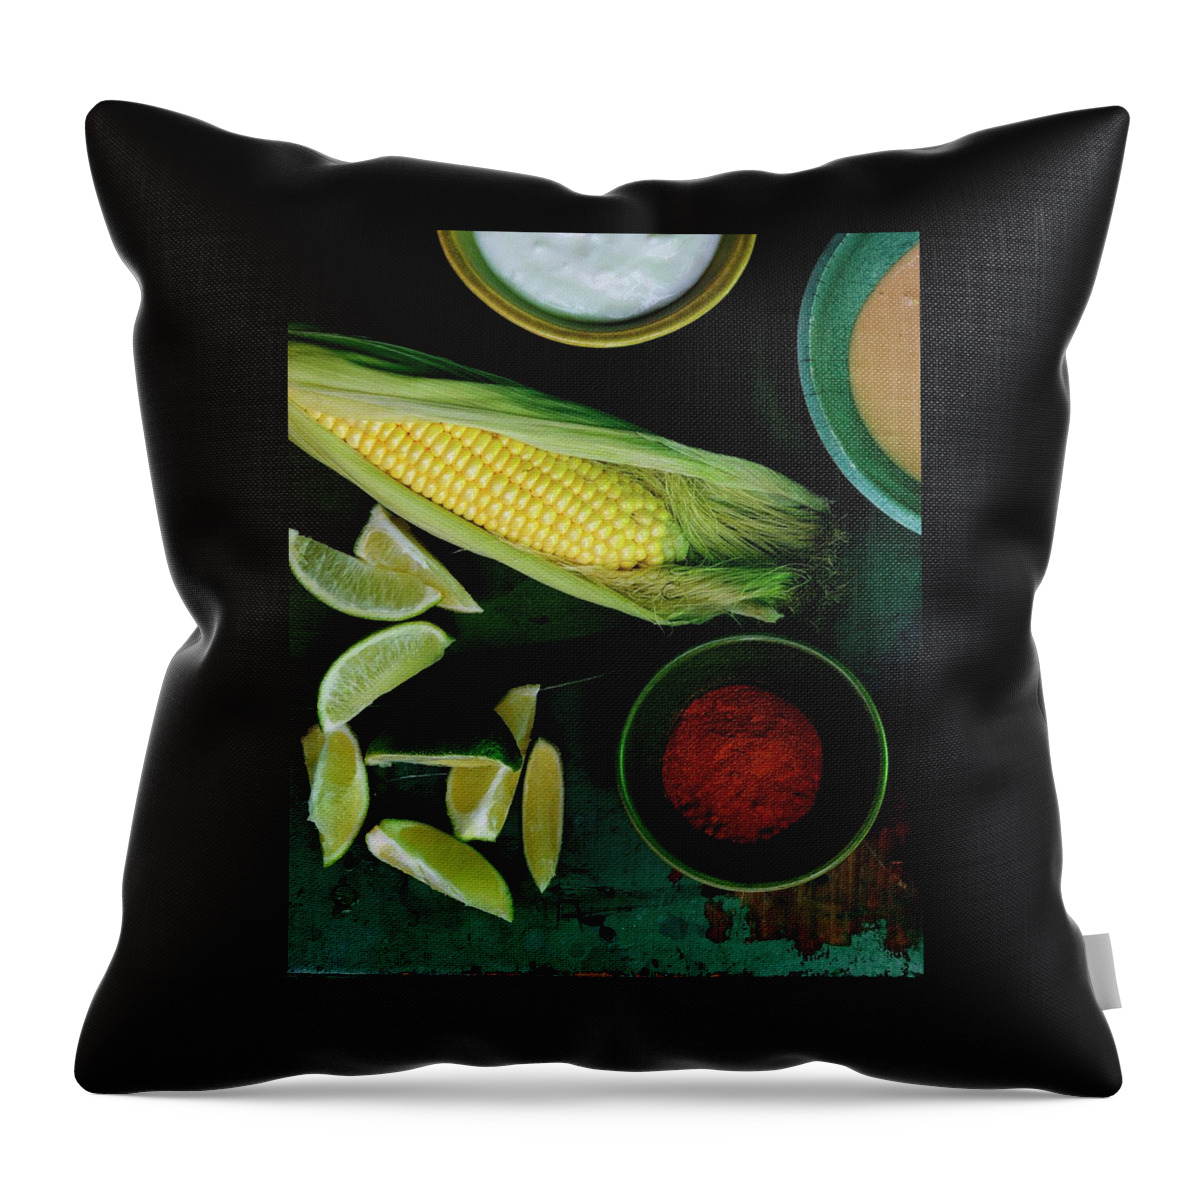 Sweetcorn And Limes Throw Pillow